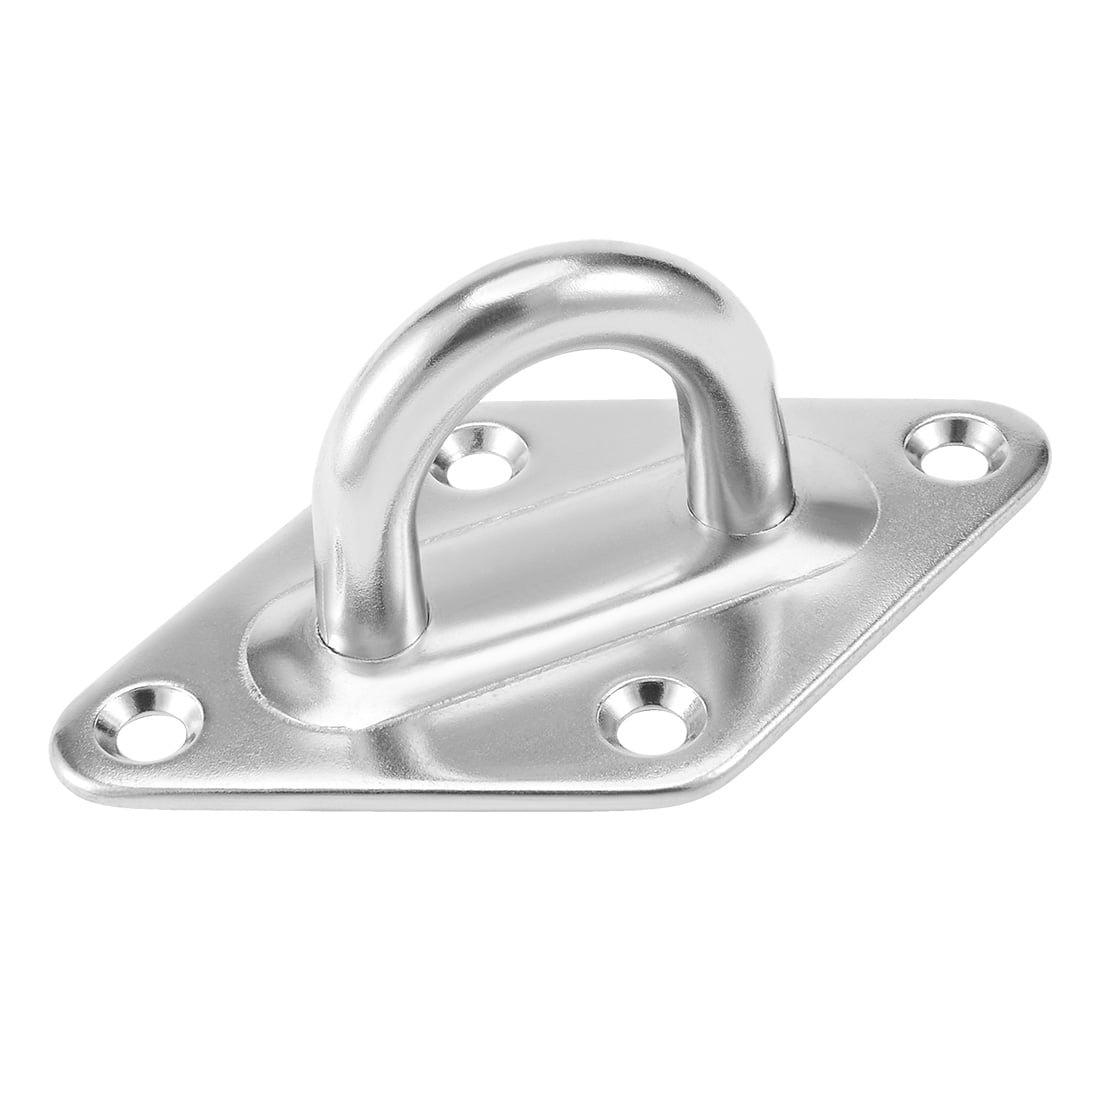 6mm BULK BUY X10 Snap Hook 316  Stainless Steel Shade Sail Boat Accessories 